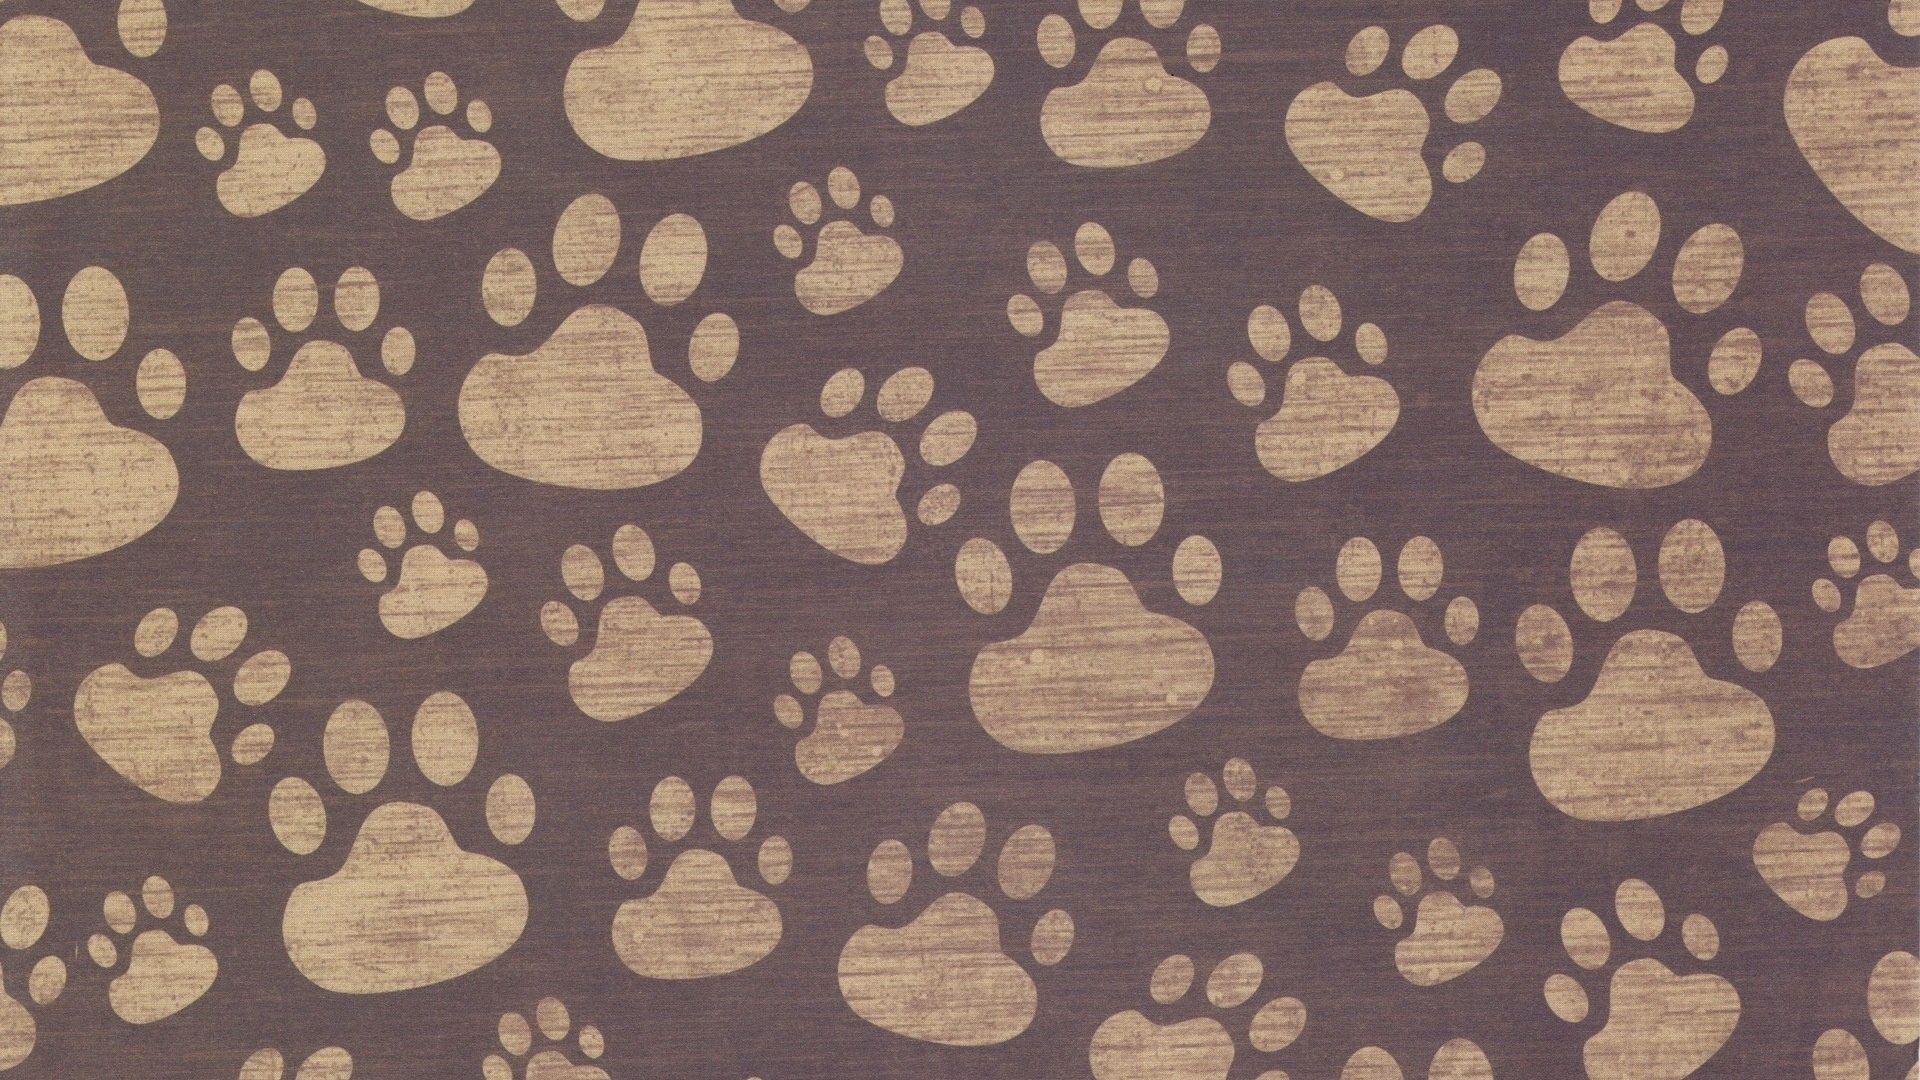 Download wallpaper 1920x1080 paw, print, background, surface, pattern full  hd, hdtv, fhd, 1080p hd background